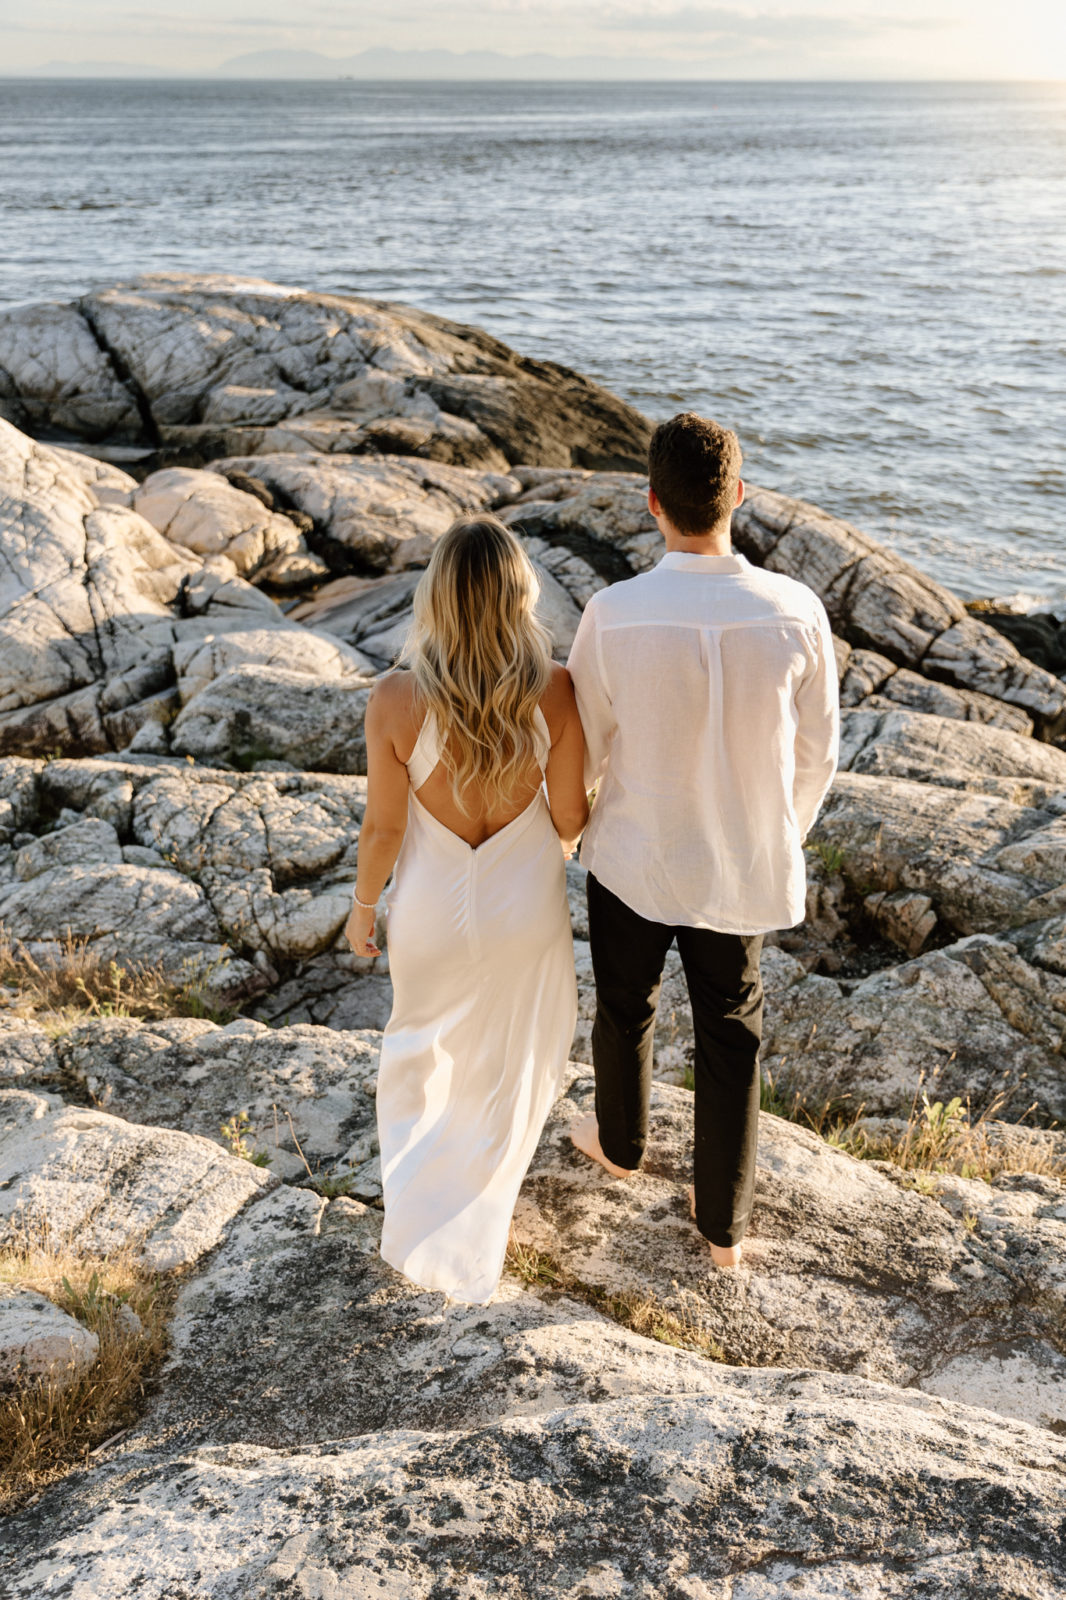 vancouver engagement inspiration, vancouver wedding inspiration, portraits on the beach, vancouver wedding vendors, vancouver wedding photographer